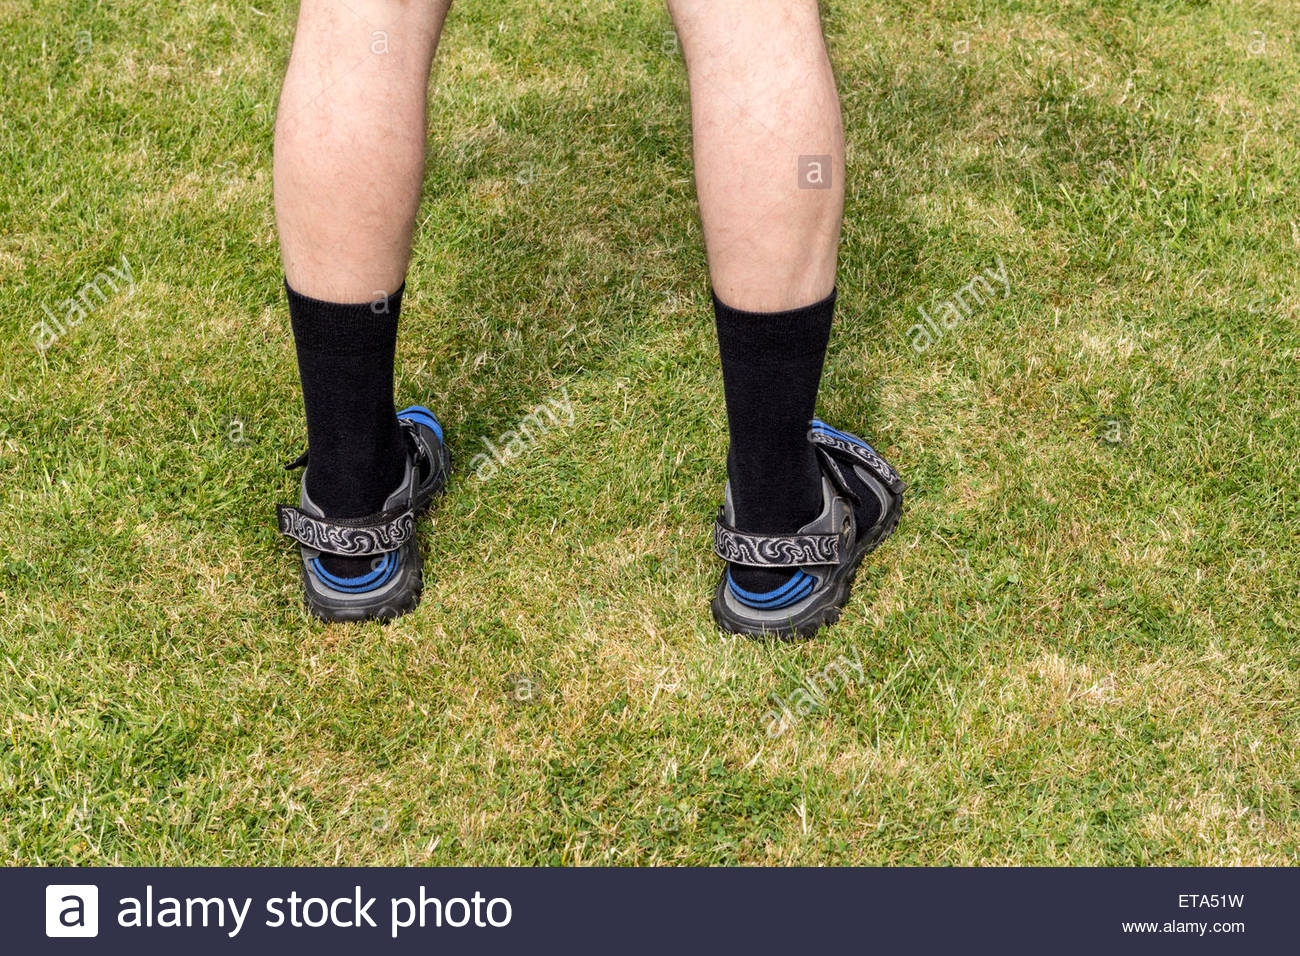 Socks Sandals Man High Resolution Stock Photography and Images - Alamy